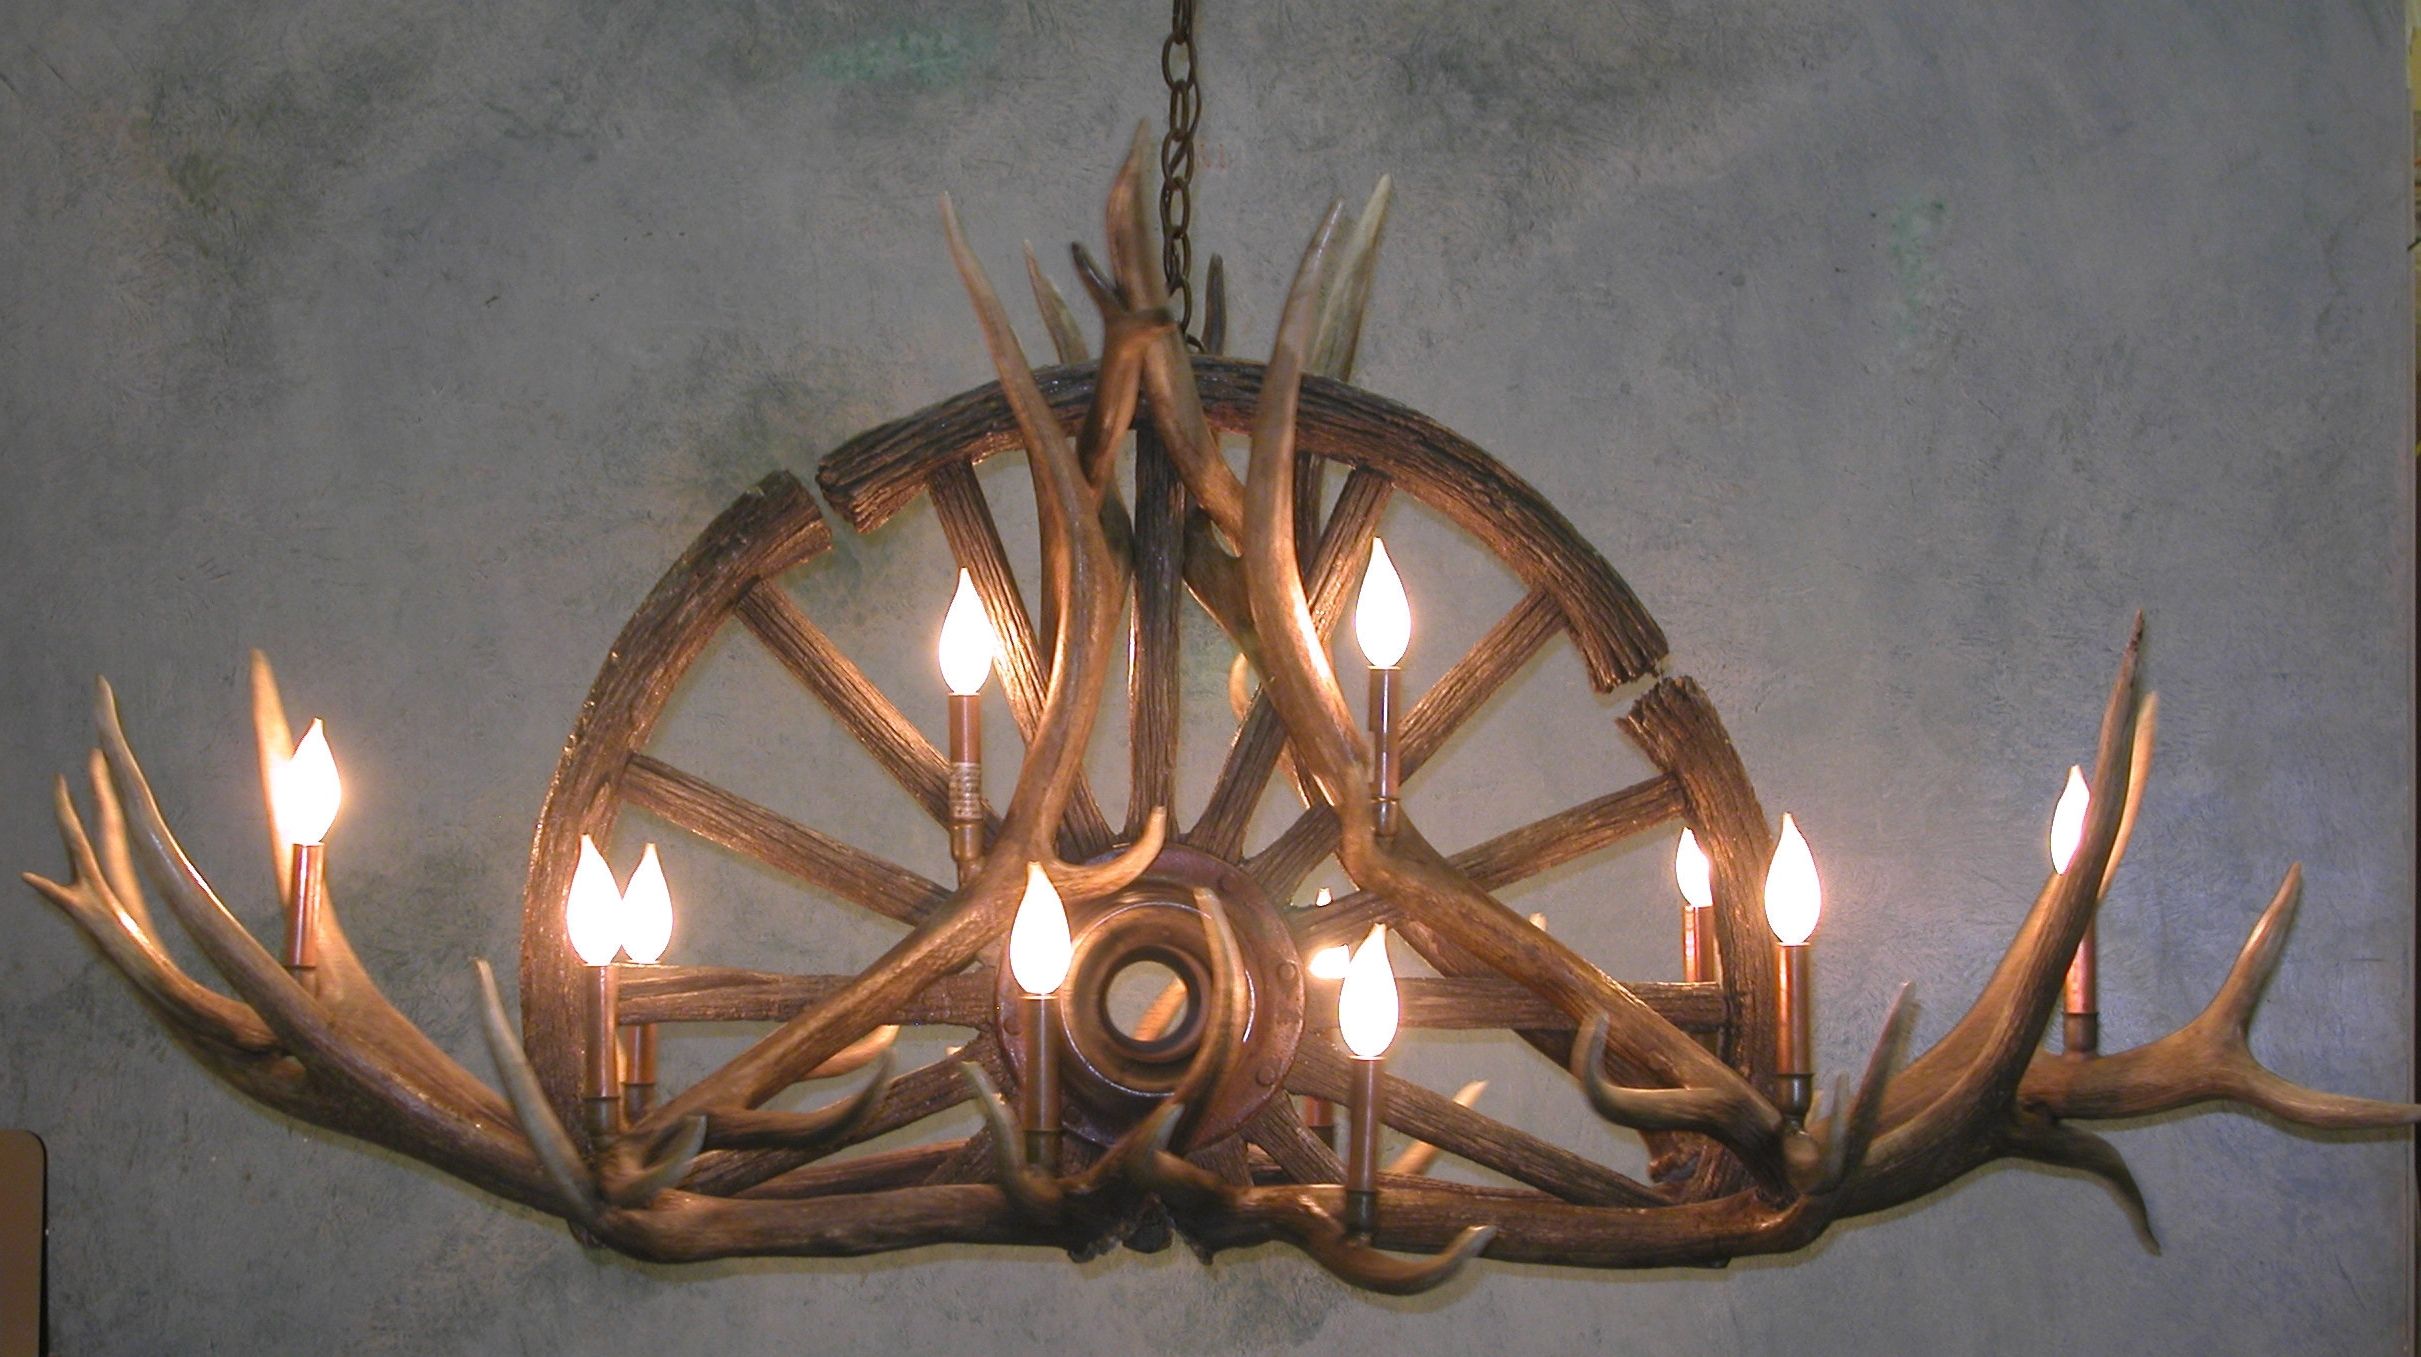 Antler Chandeliers For Sale (View 2 of 15)